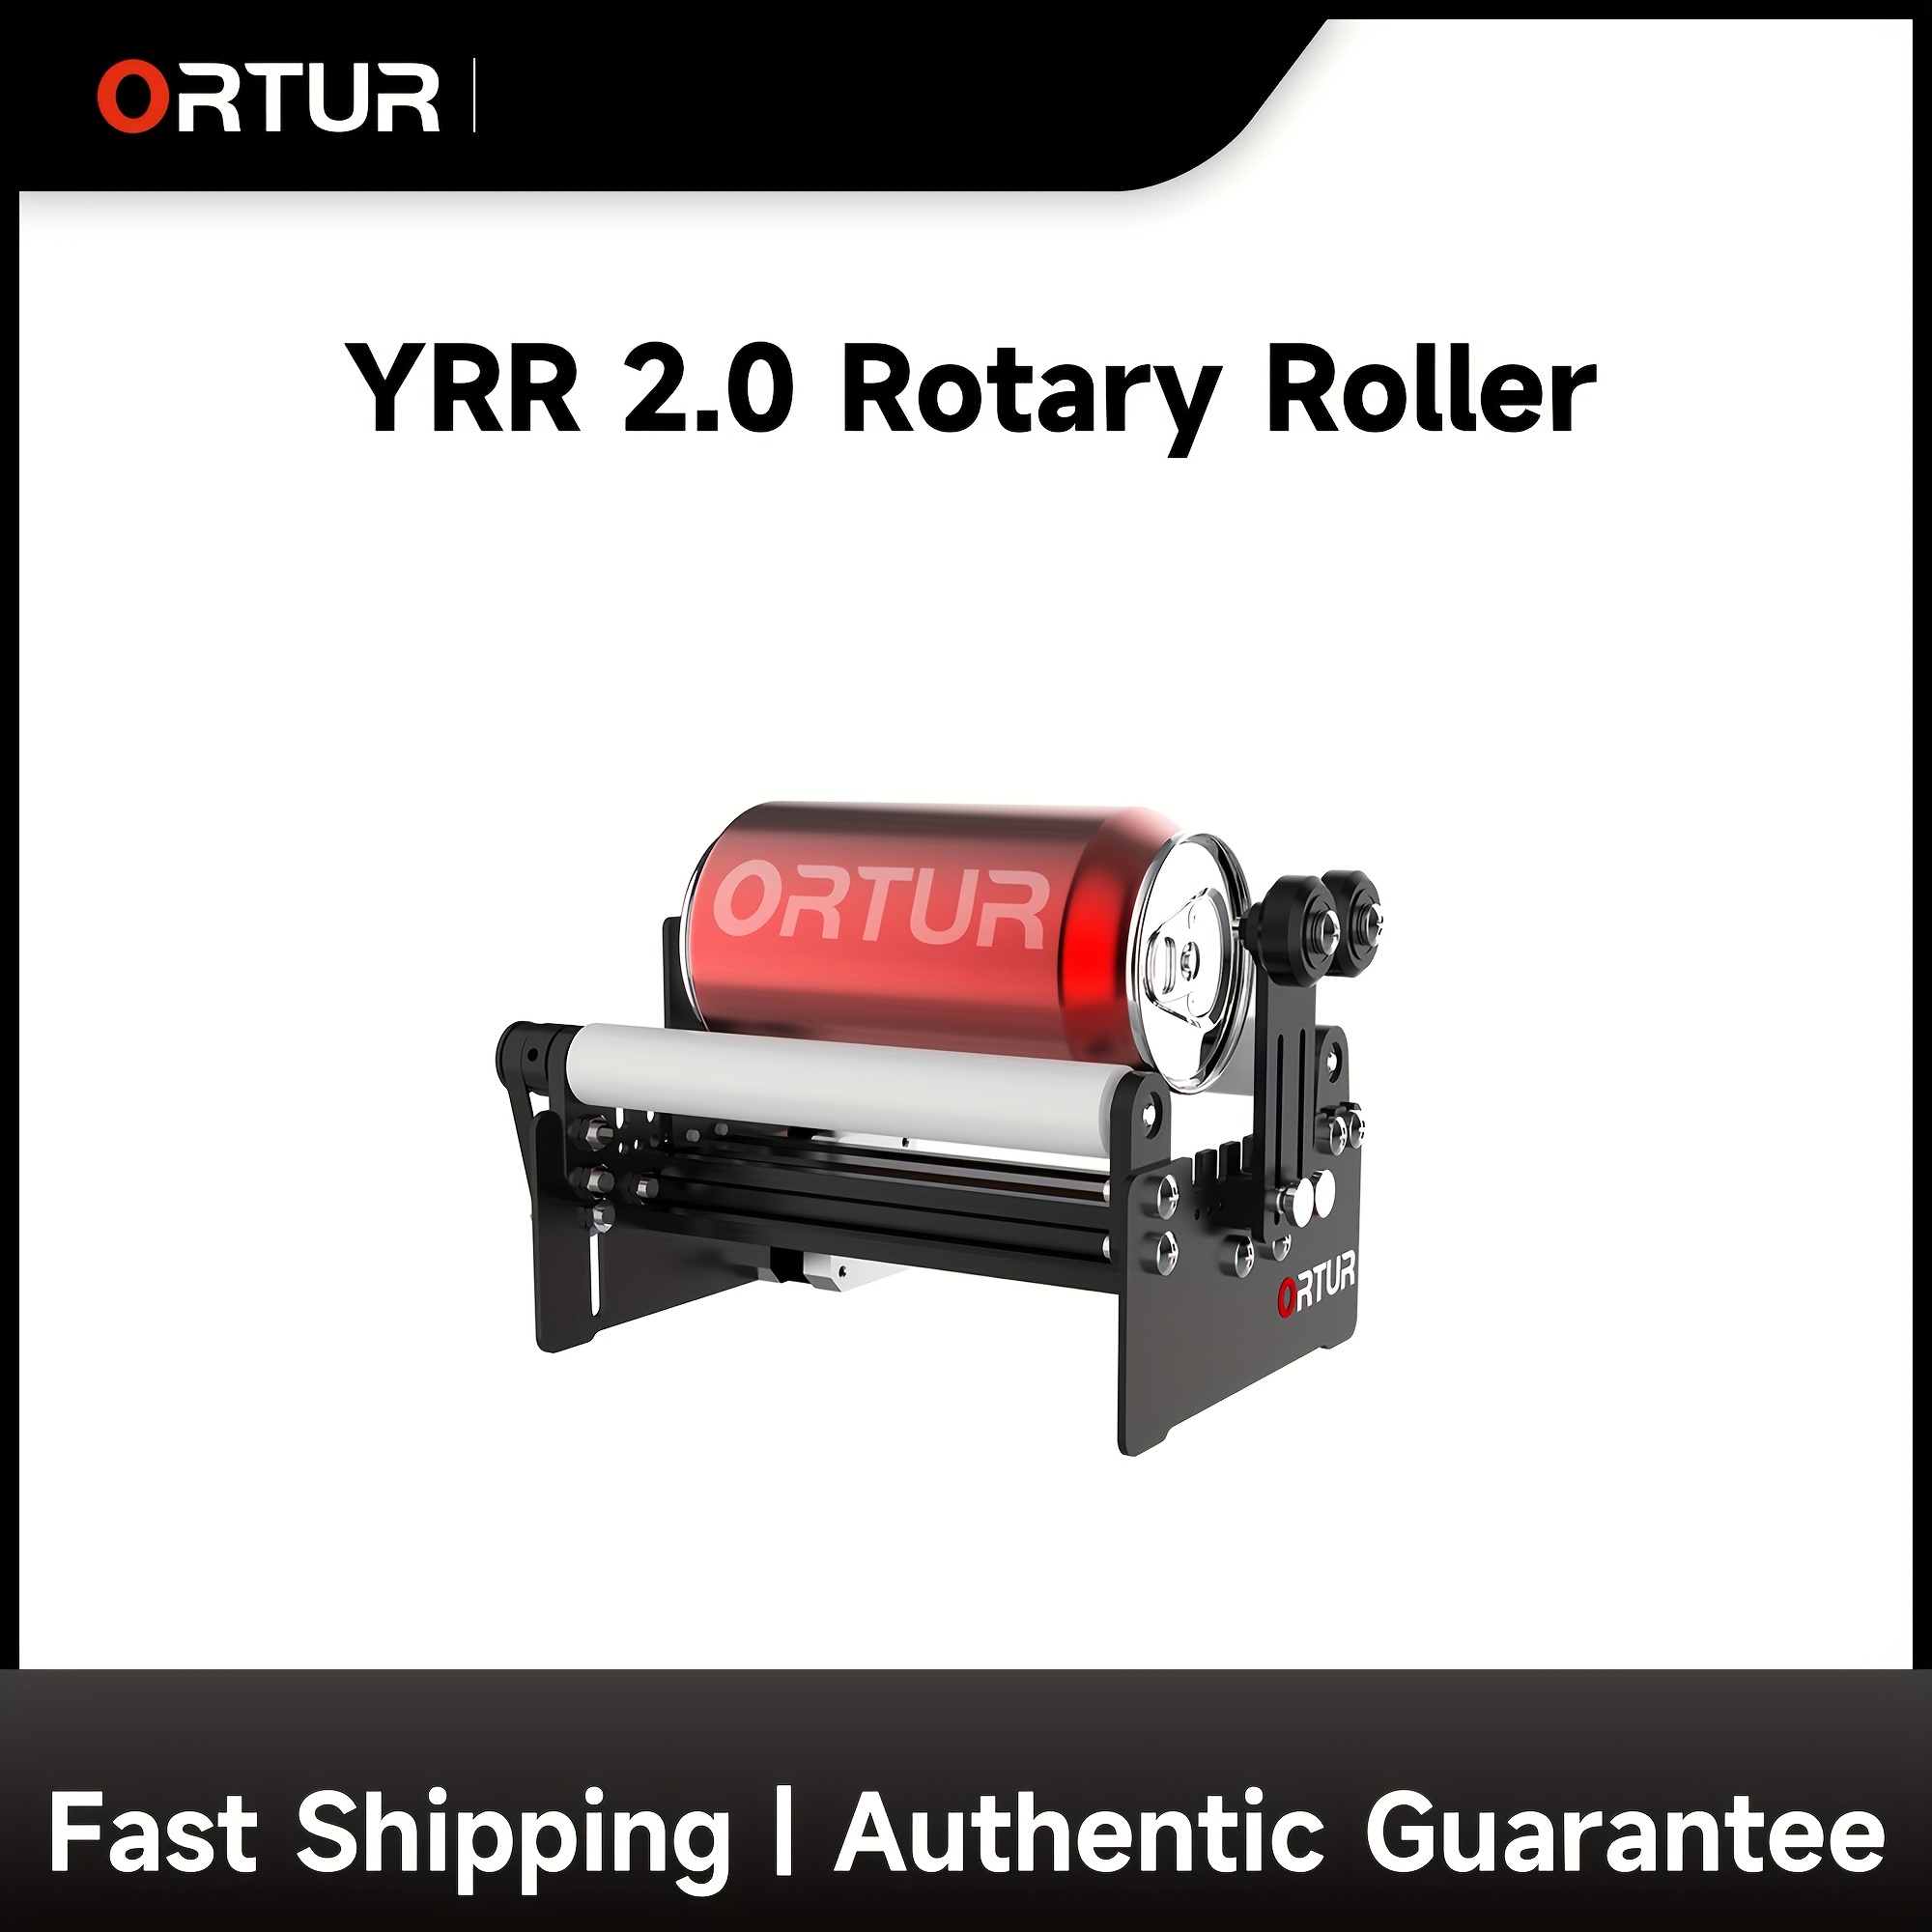 Sculpfun Laser Rotary Roller, Laser Engraver Y-Axis Rotary Module, 360 Laser Rotary Attachment for Engraving Cylindrical Cans, Size: 27